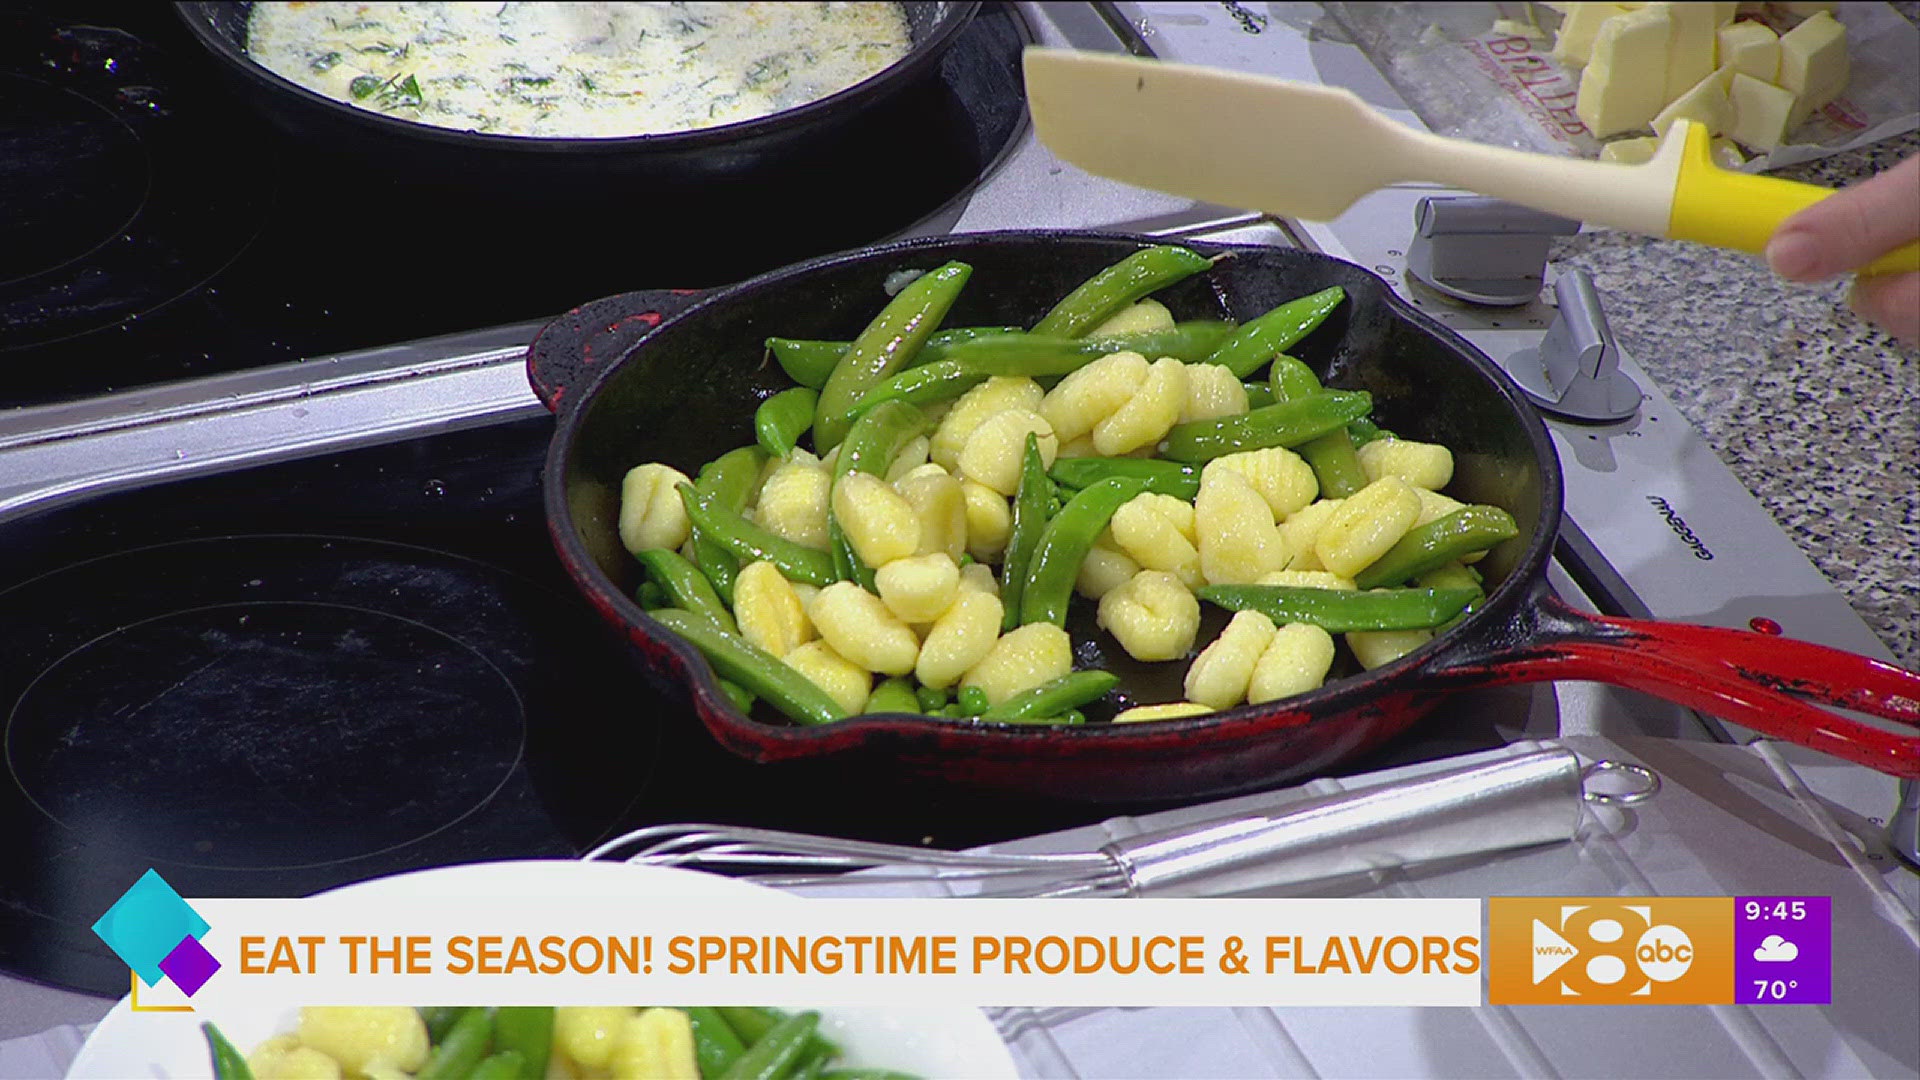 Roni Proter of Dinner Reinvented shows you how to lighten up and brighten up by adding these springtime flavors to your foods